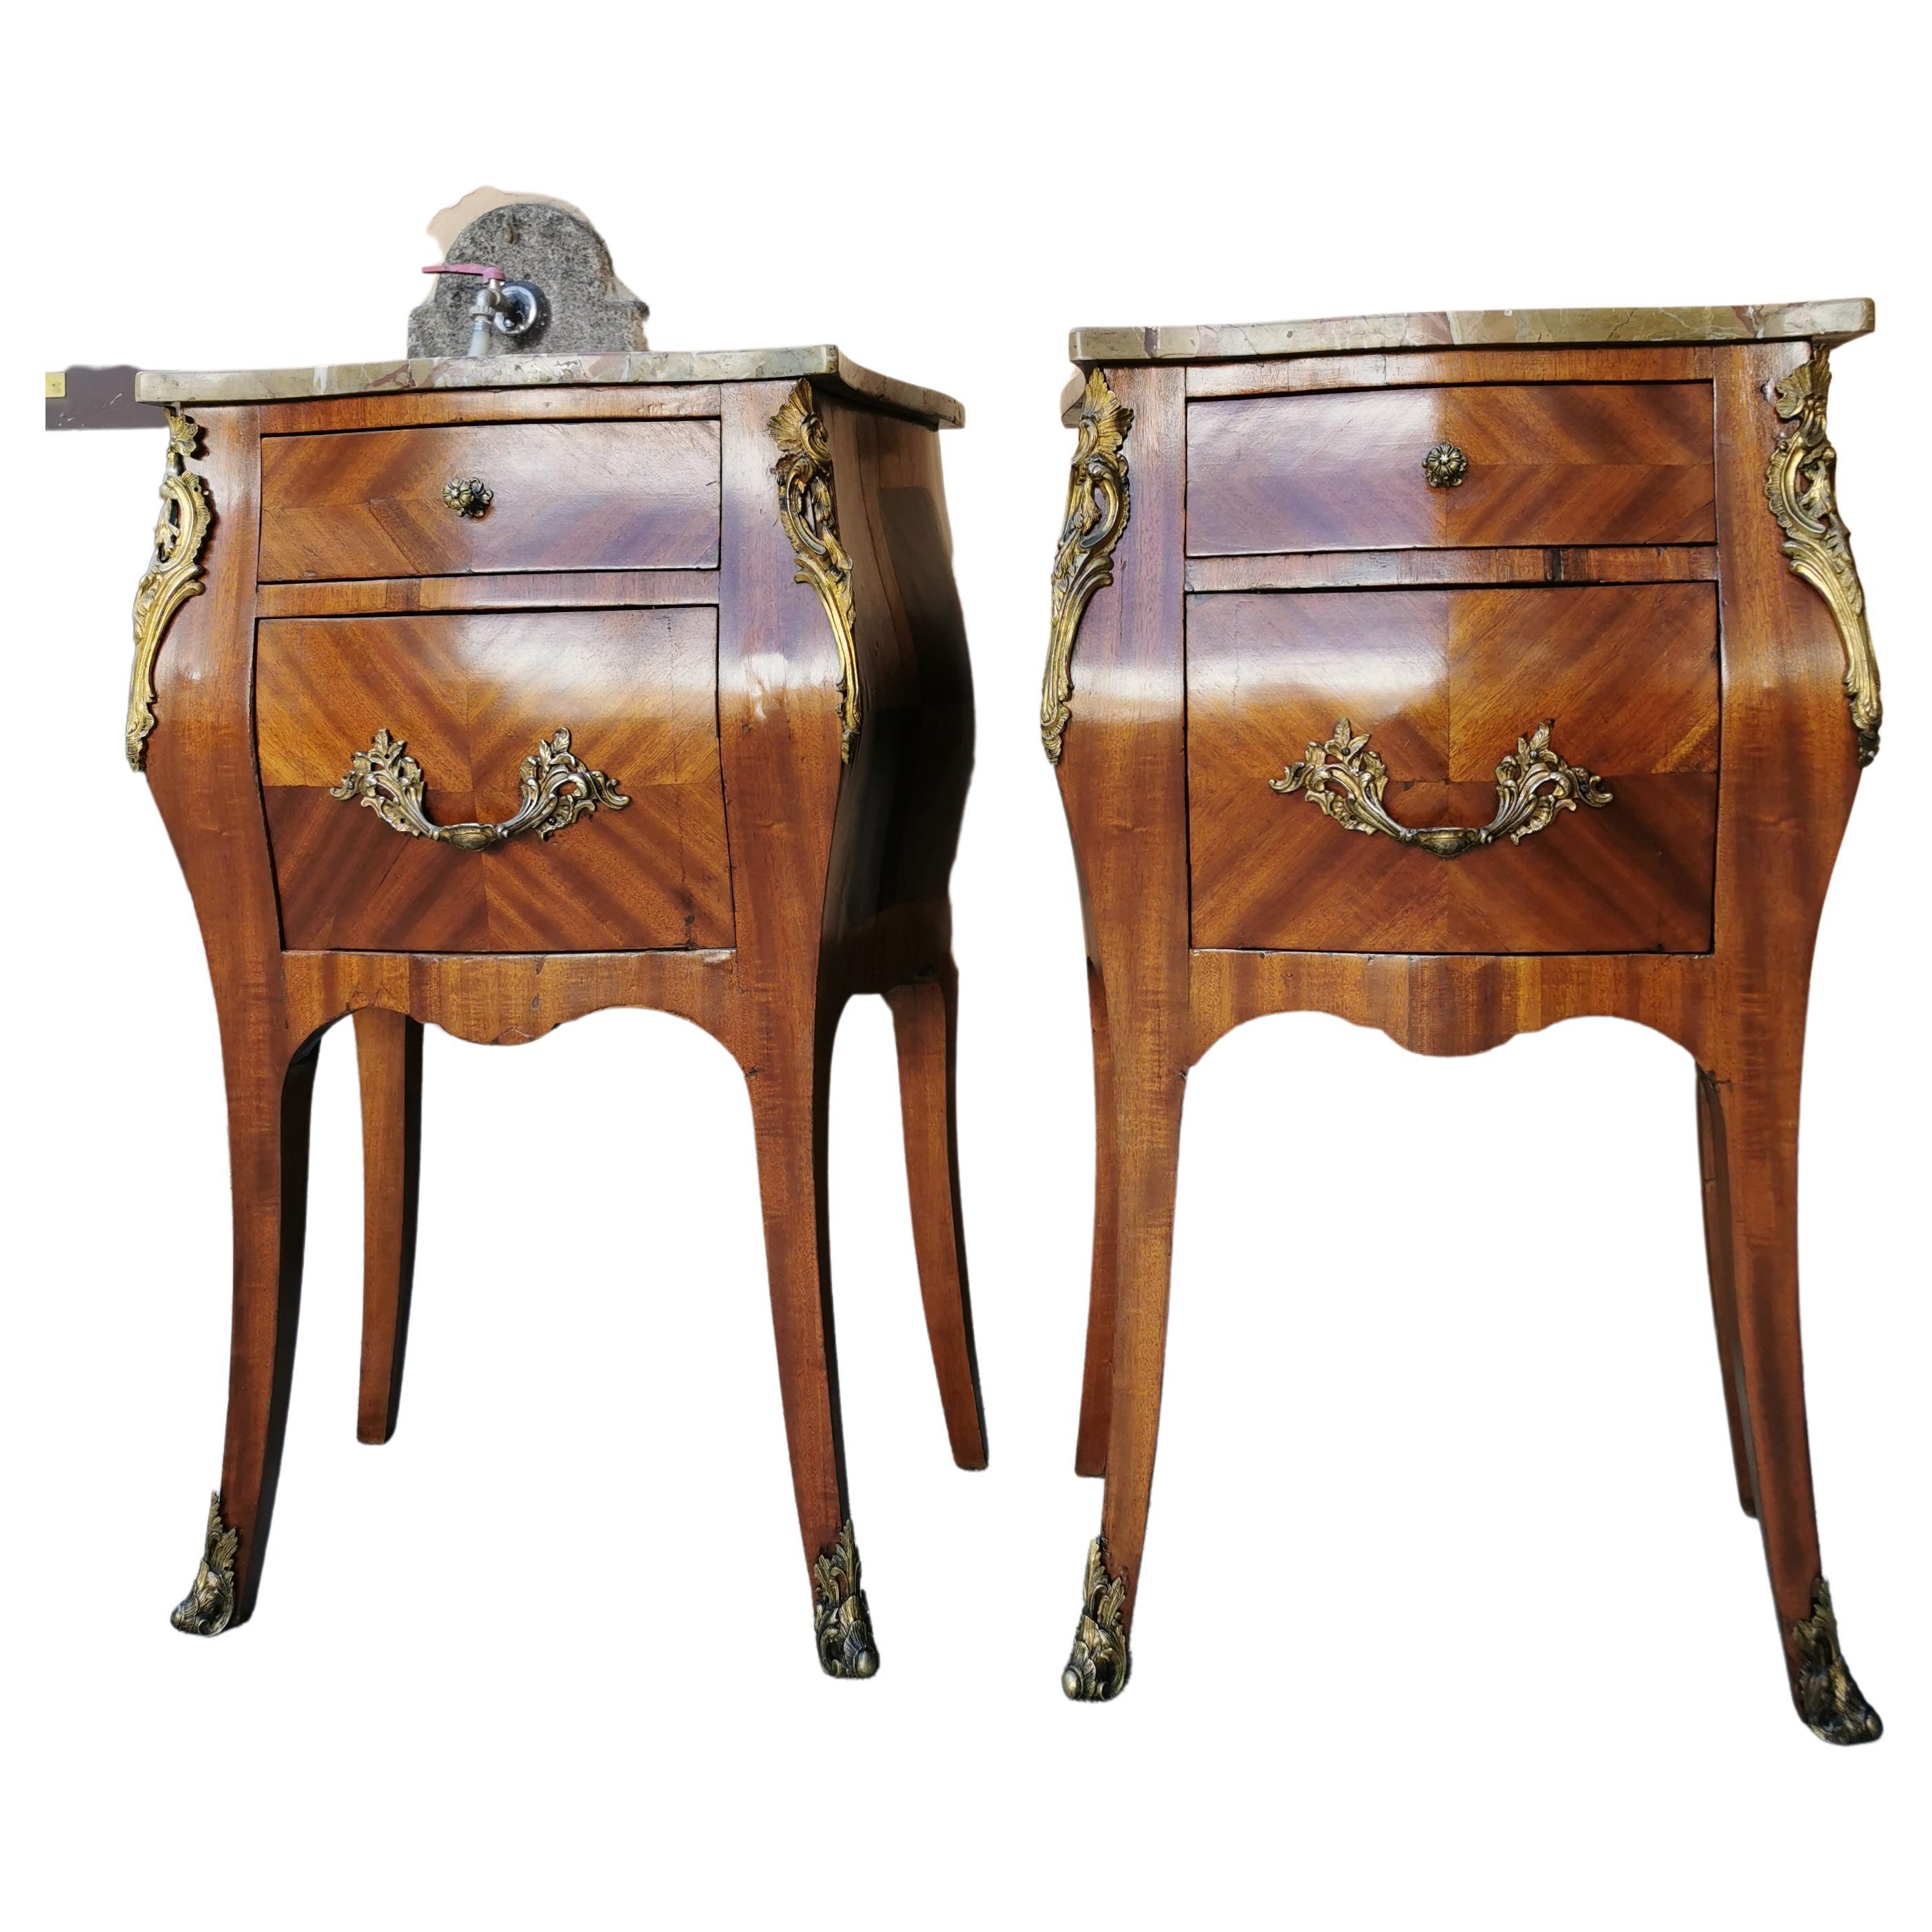 Pair of Marquetry side commodes with marble top nd bronze details. Louis XV style and end of 19th century France 
has been restored. Rosewood, walnut, marble and gilded bronze
will be shipped inside a secured wood crate.
  